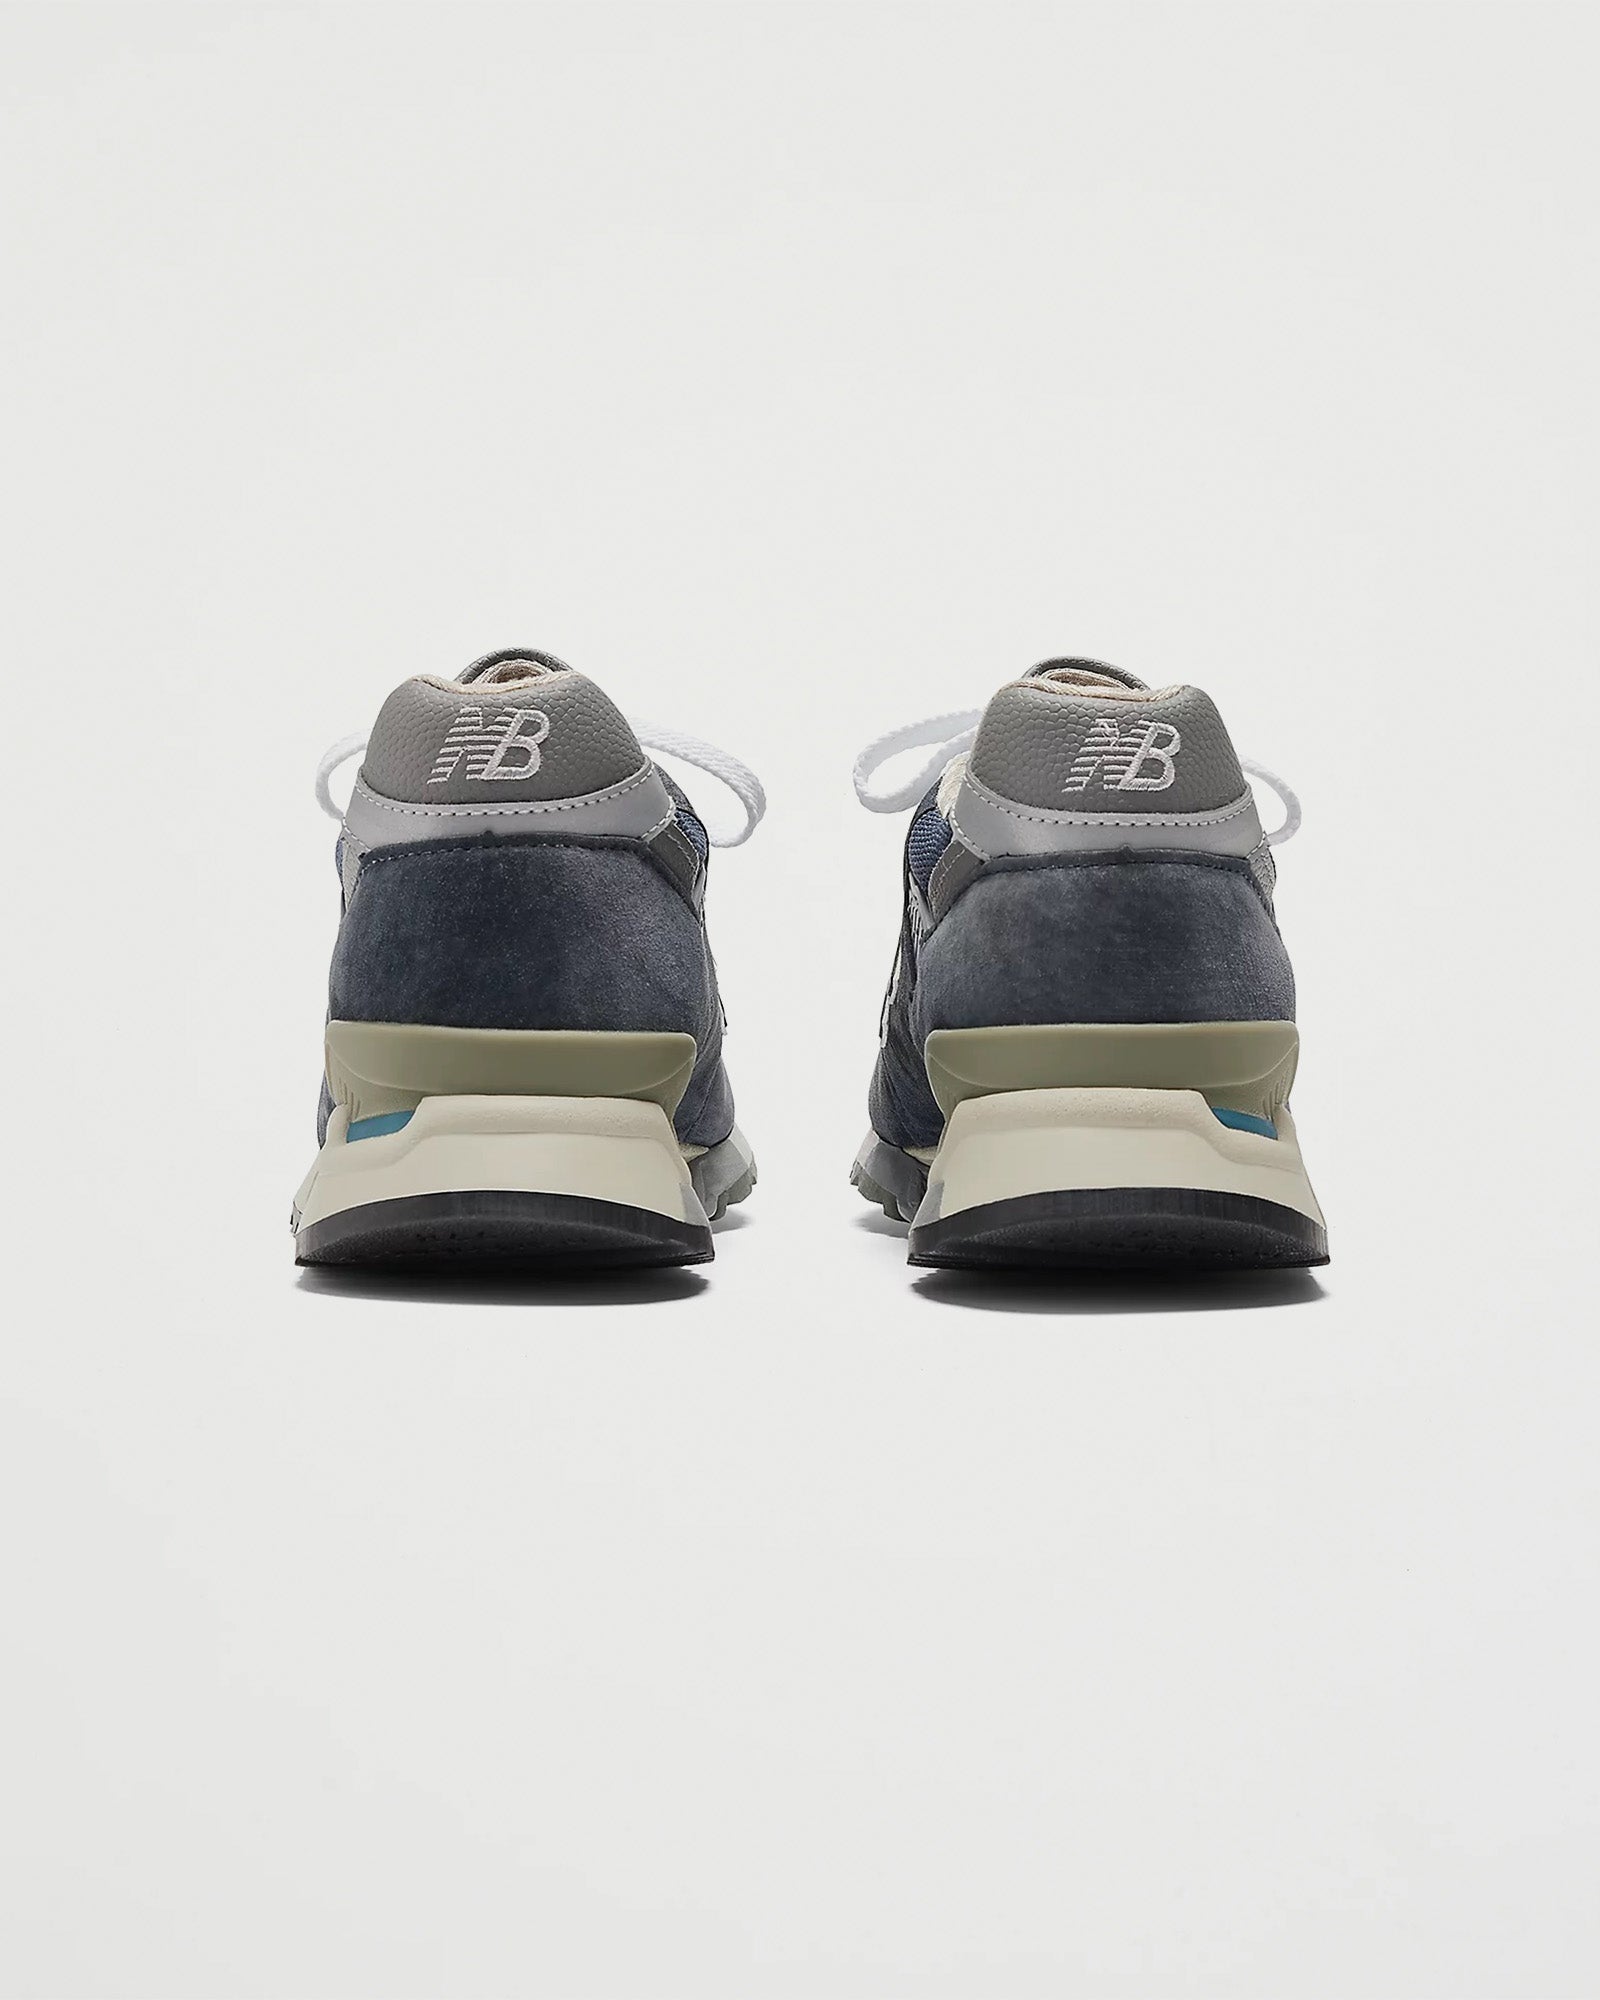 New Balance 998 NV 'Made in USA' Navy Shoes Sneakers Men